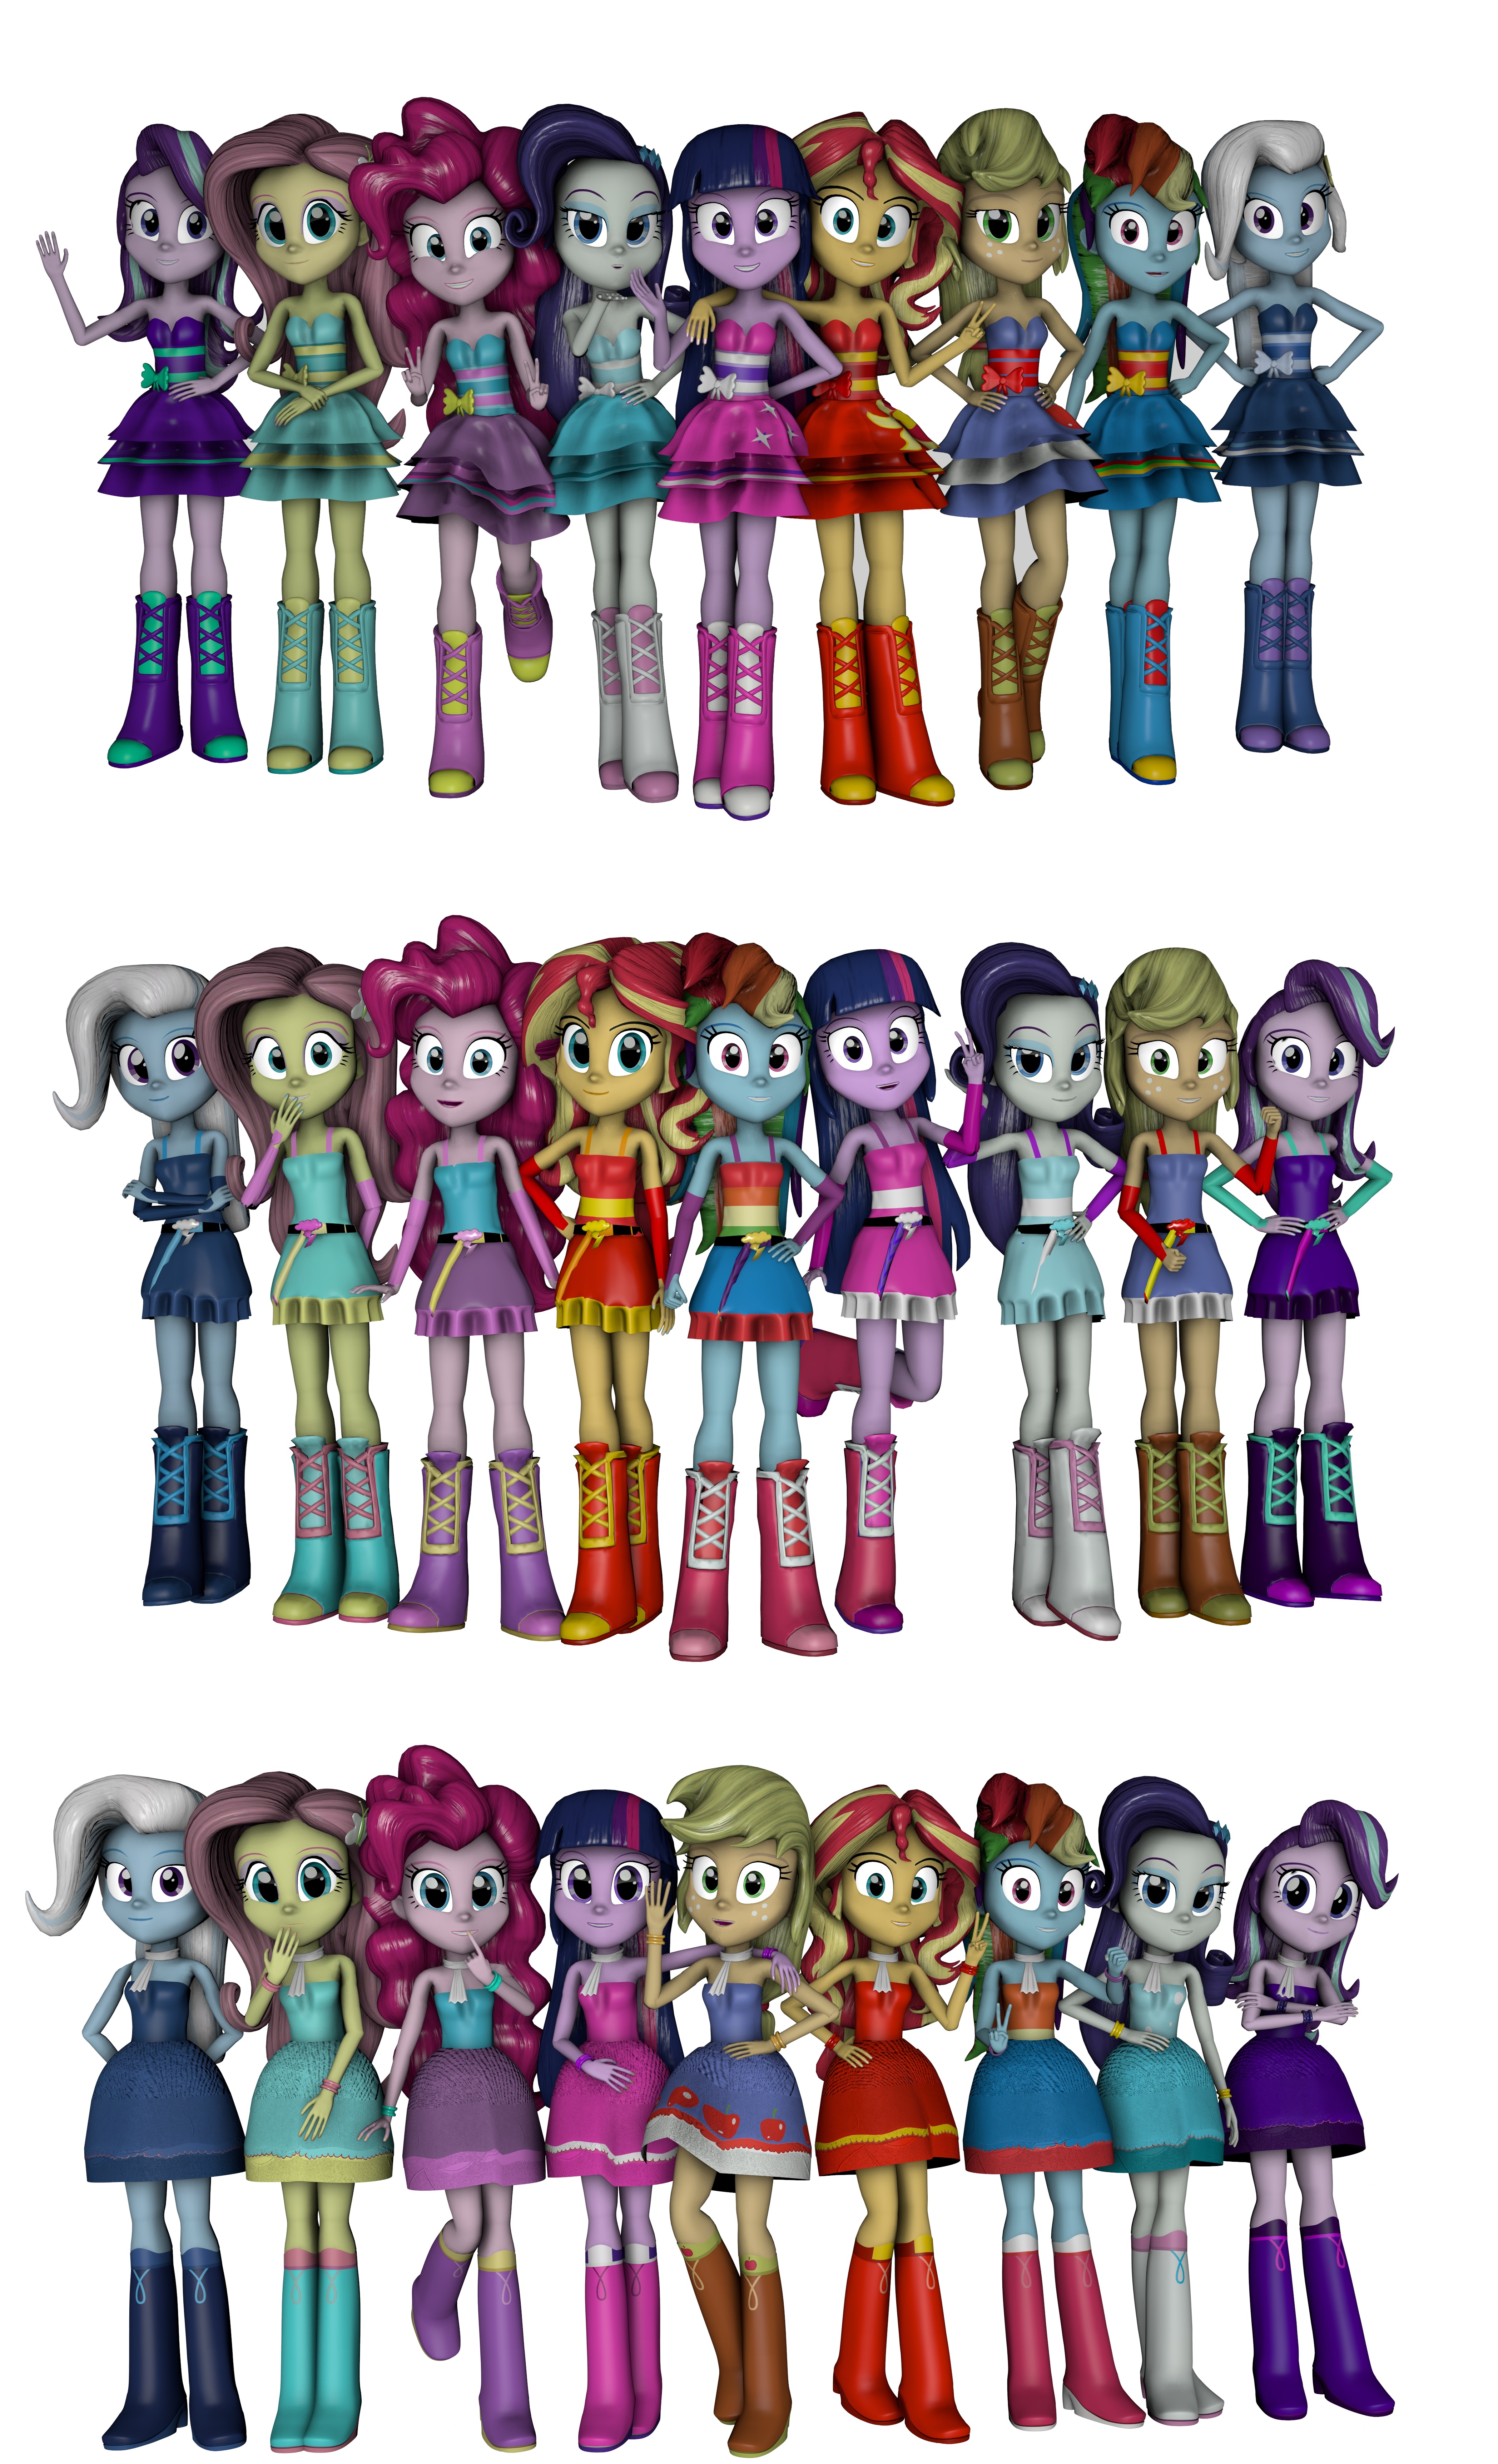 Rainbow Dash standing (S03E07) by DJDavid98 on DeviantArt  My little pony  twilight, My little pony drawing, My little pony characters